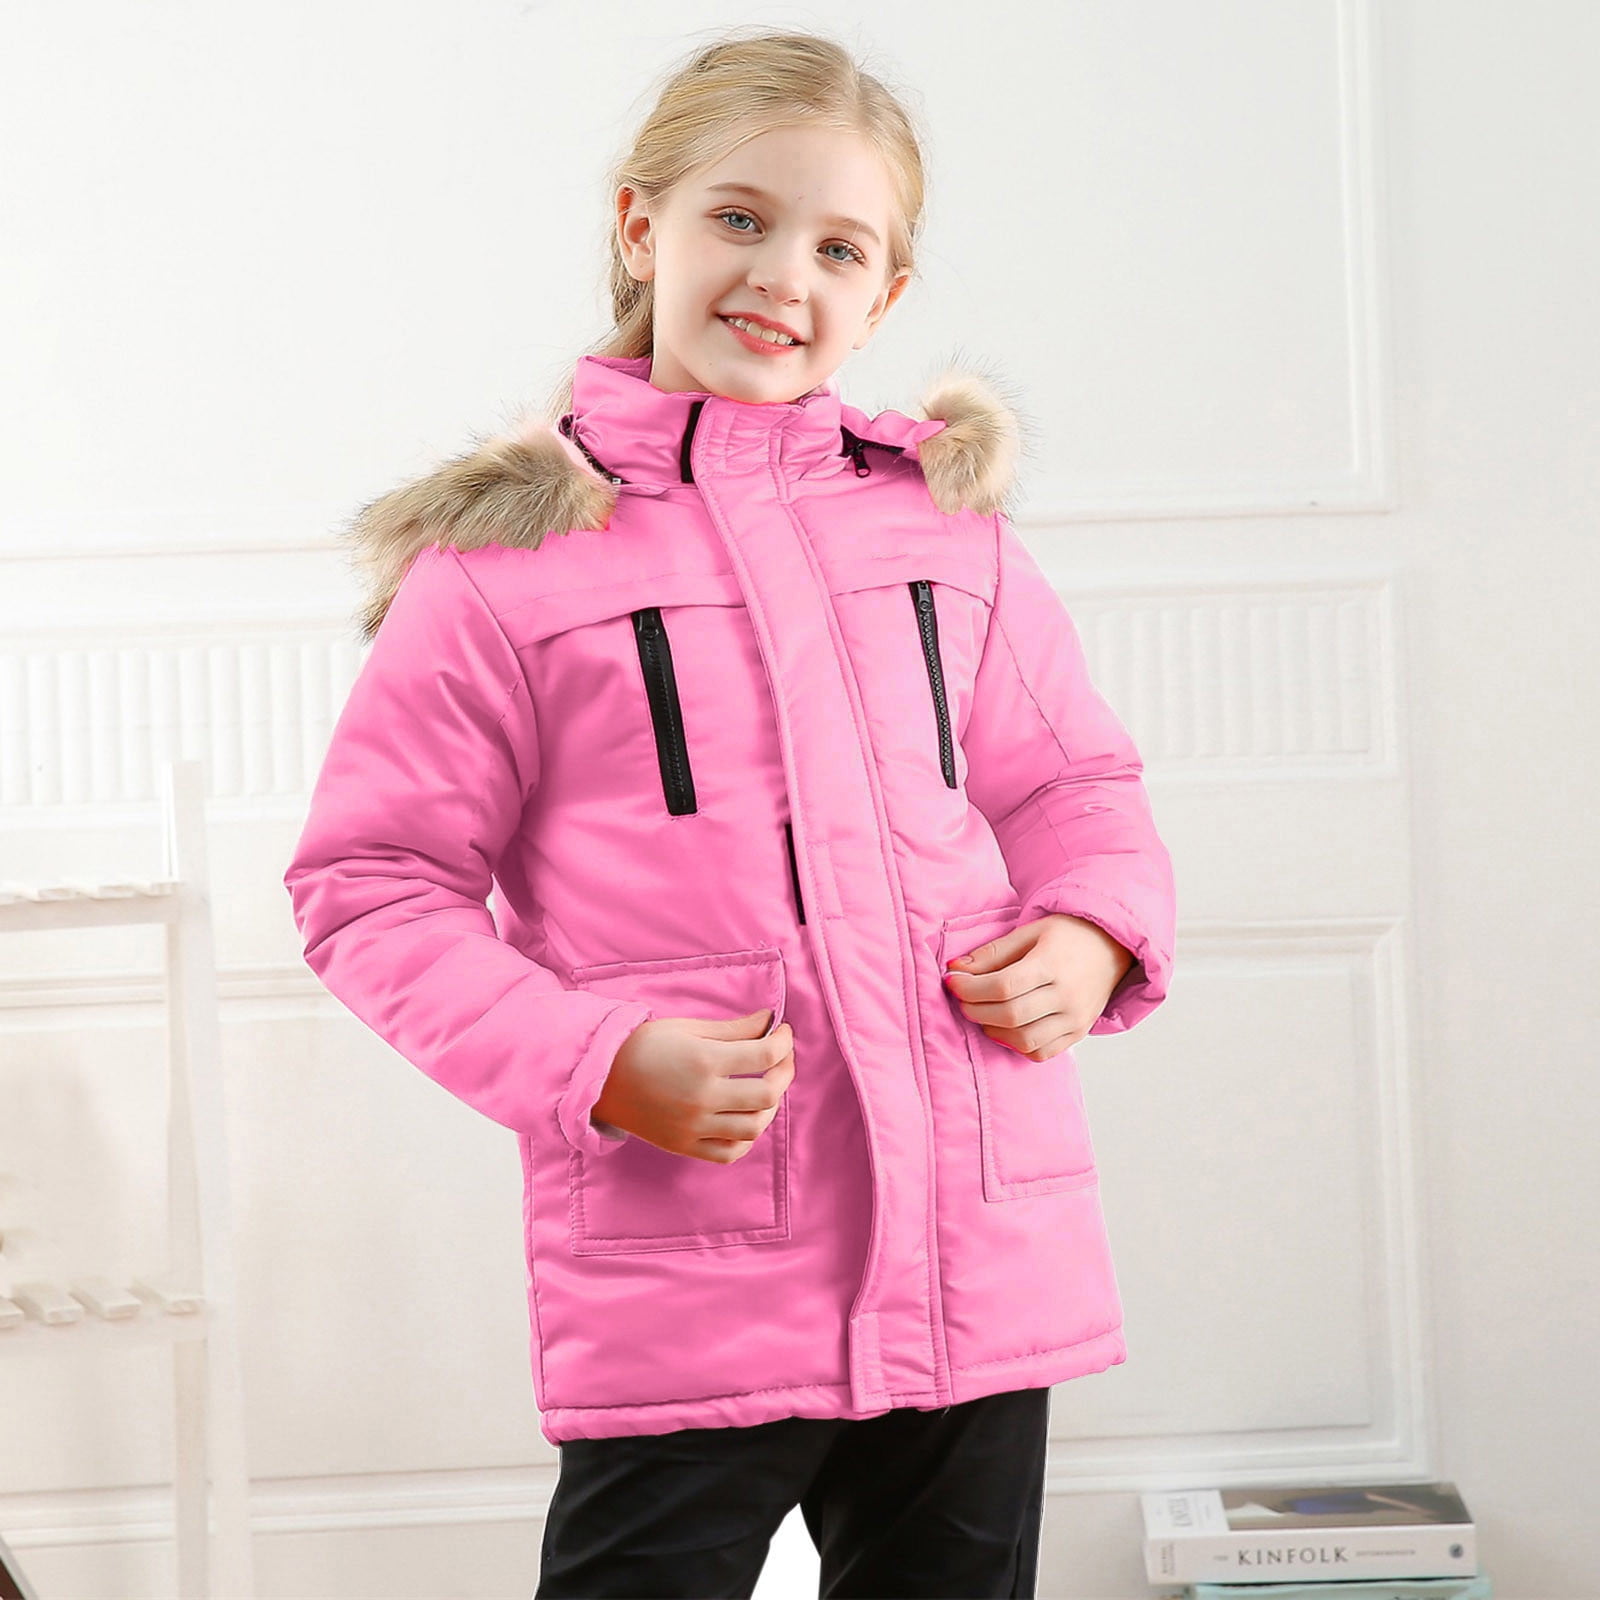 Aayomet Coats For Kids Girls Girl's Winter Lined Long Parka Puffer Coat  Thicken Ski Jacket With Trim Hood,Pink 7-8 Years 